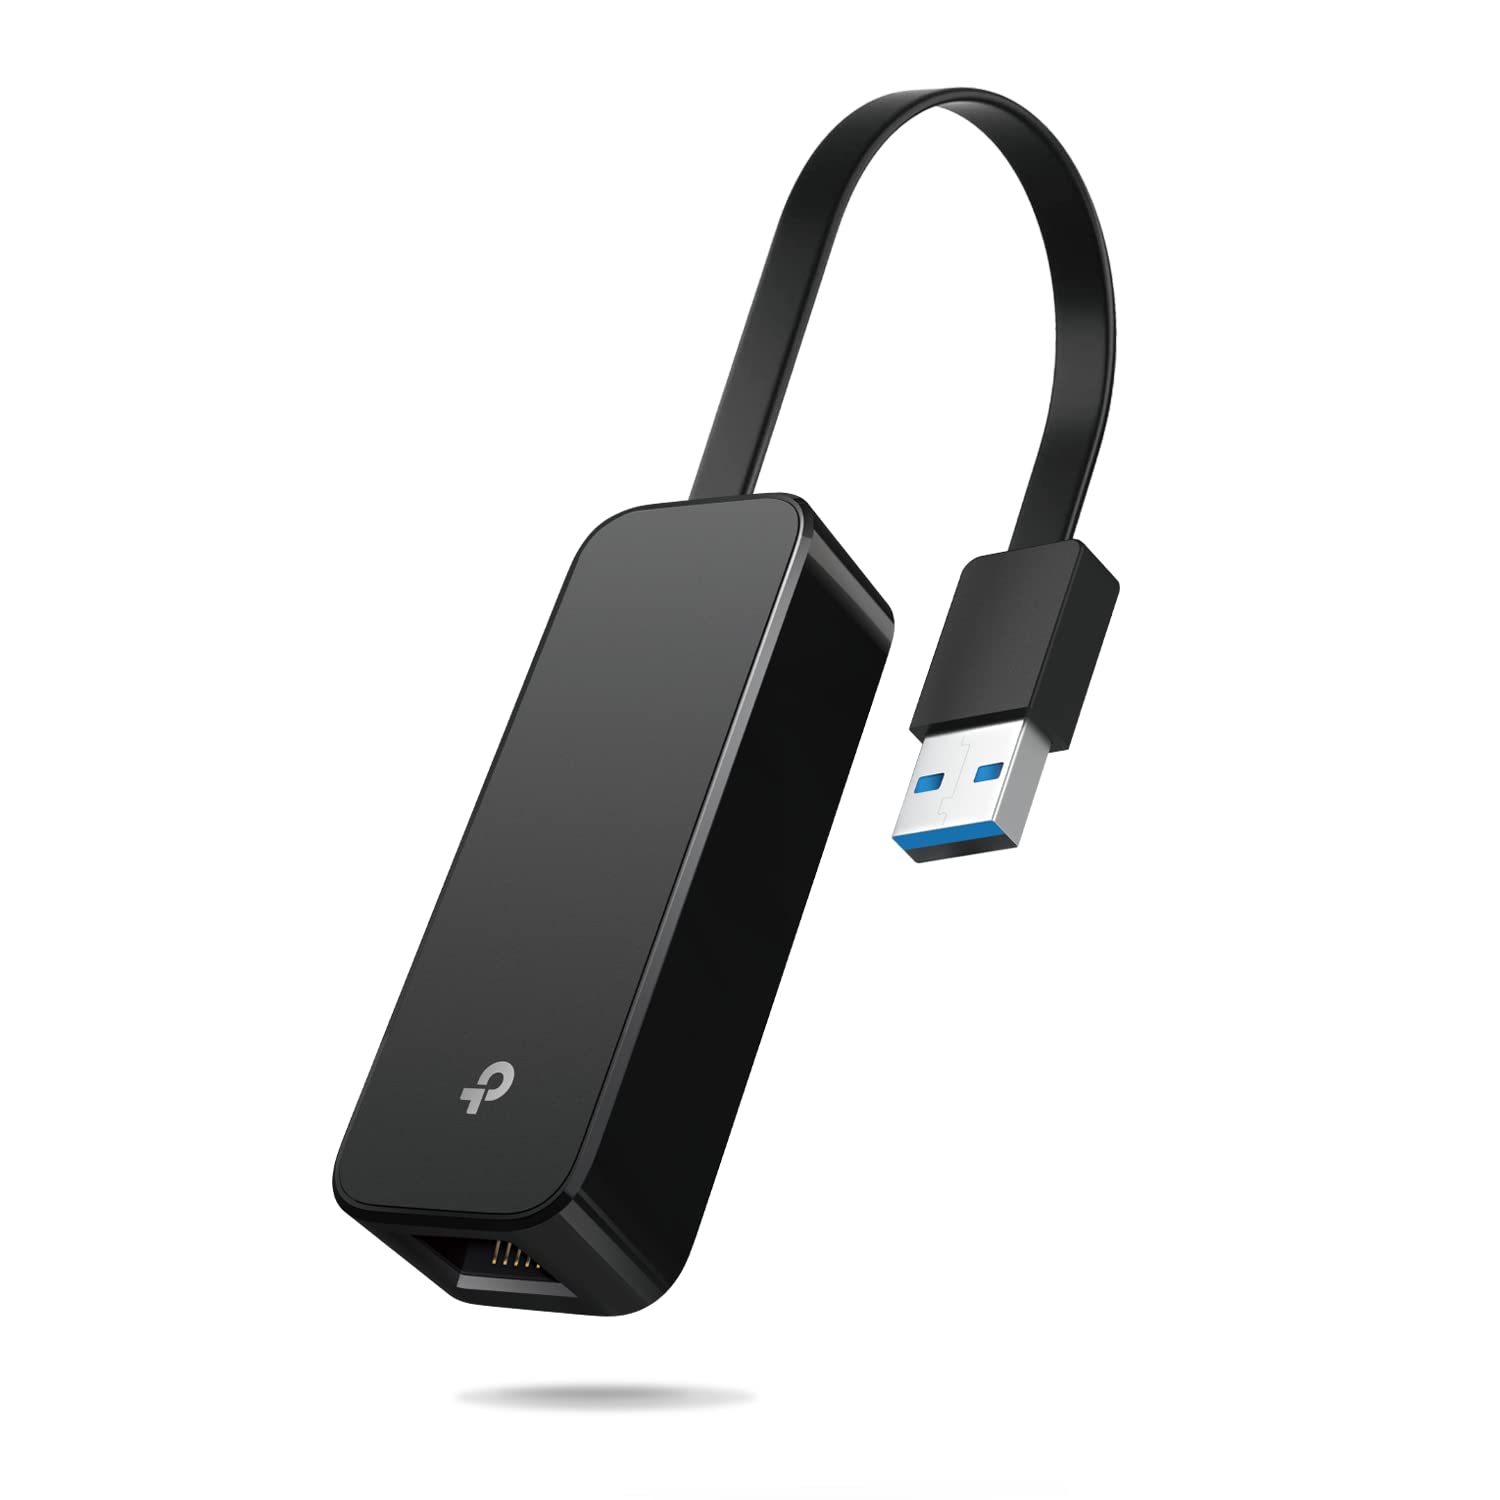 Best USB to Ethernet Adapter: Top Picks for Connectivity